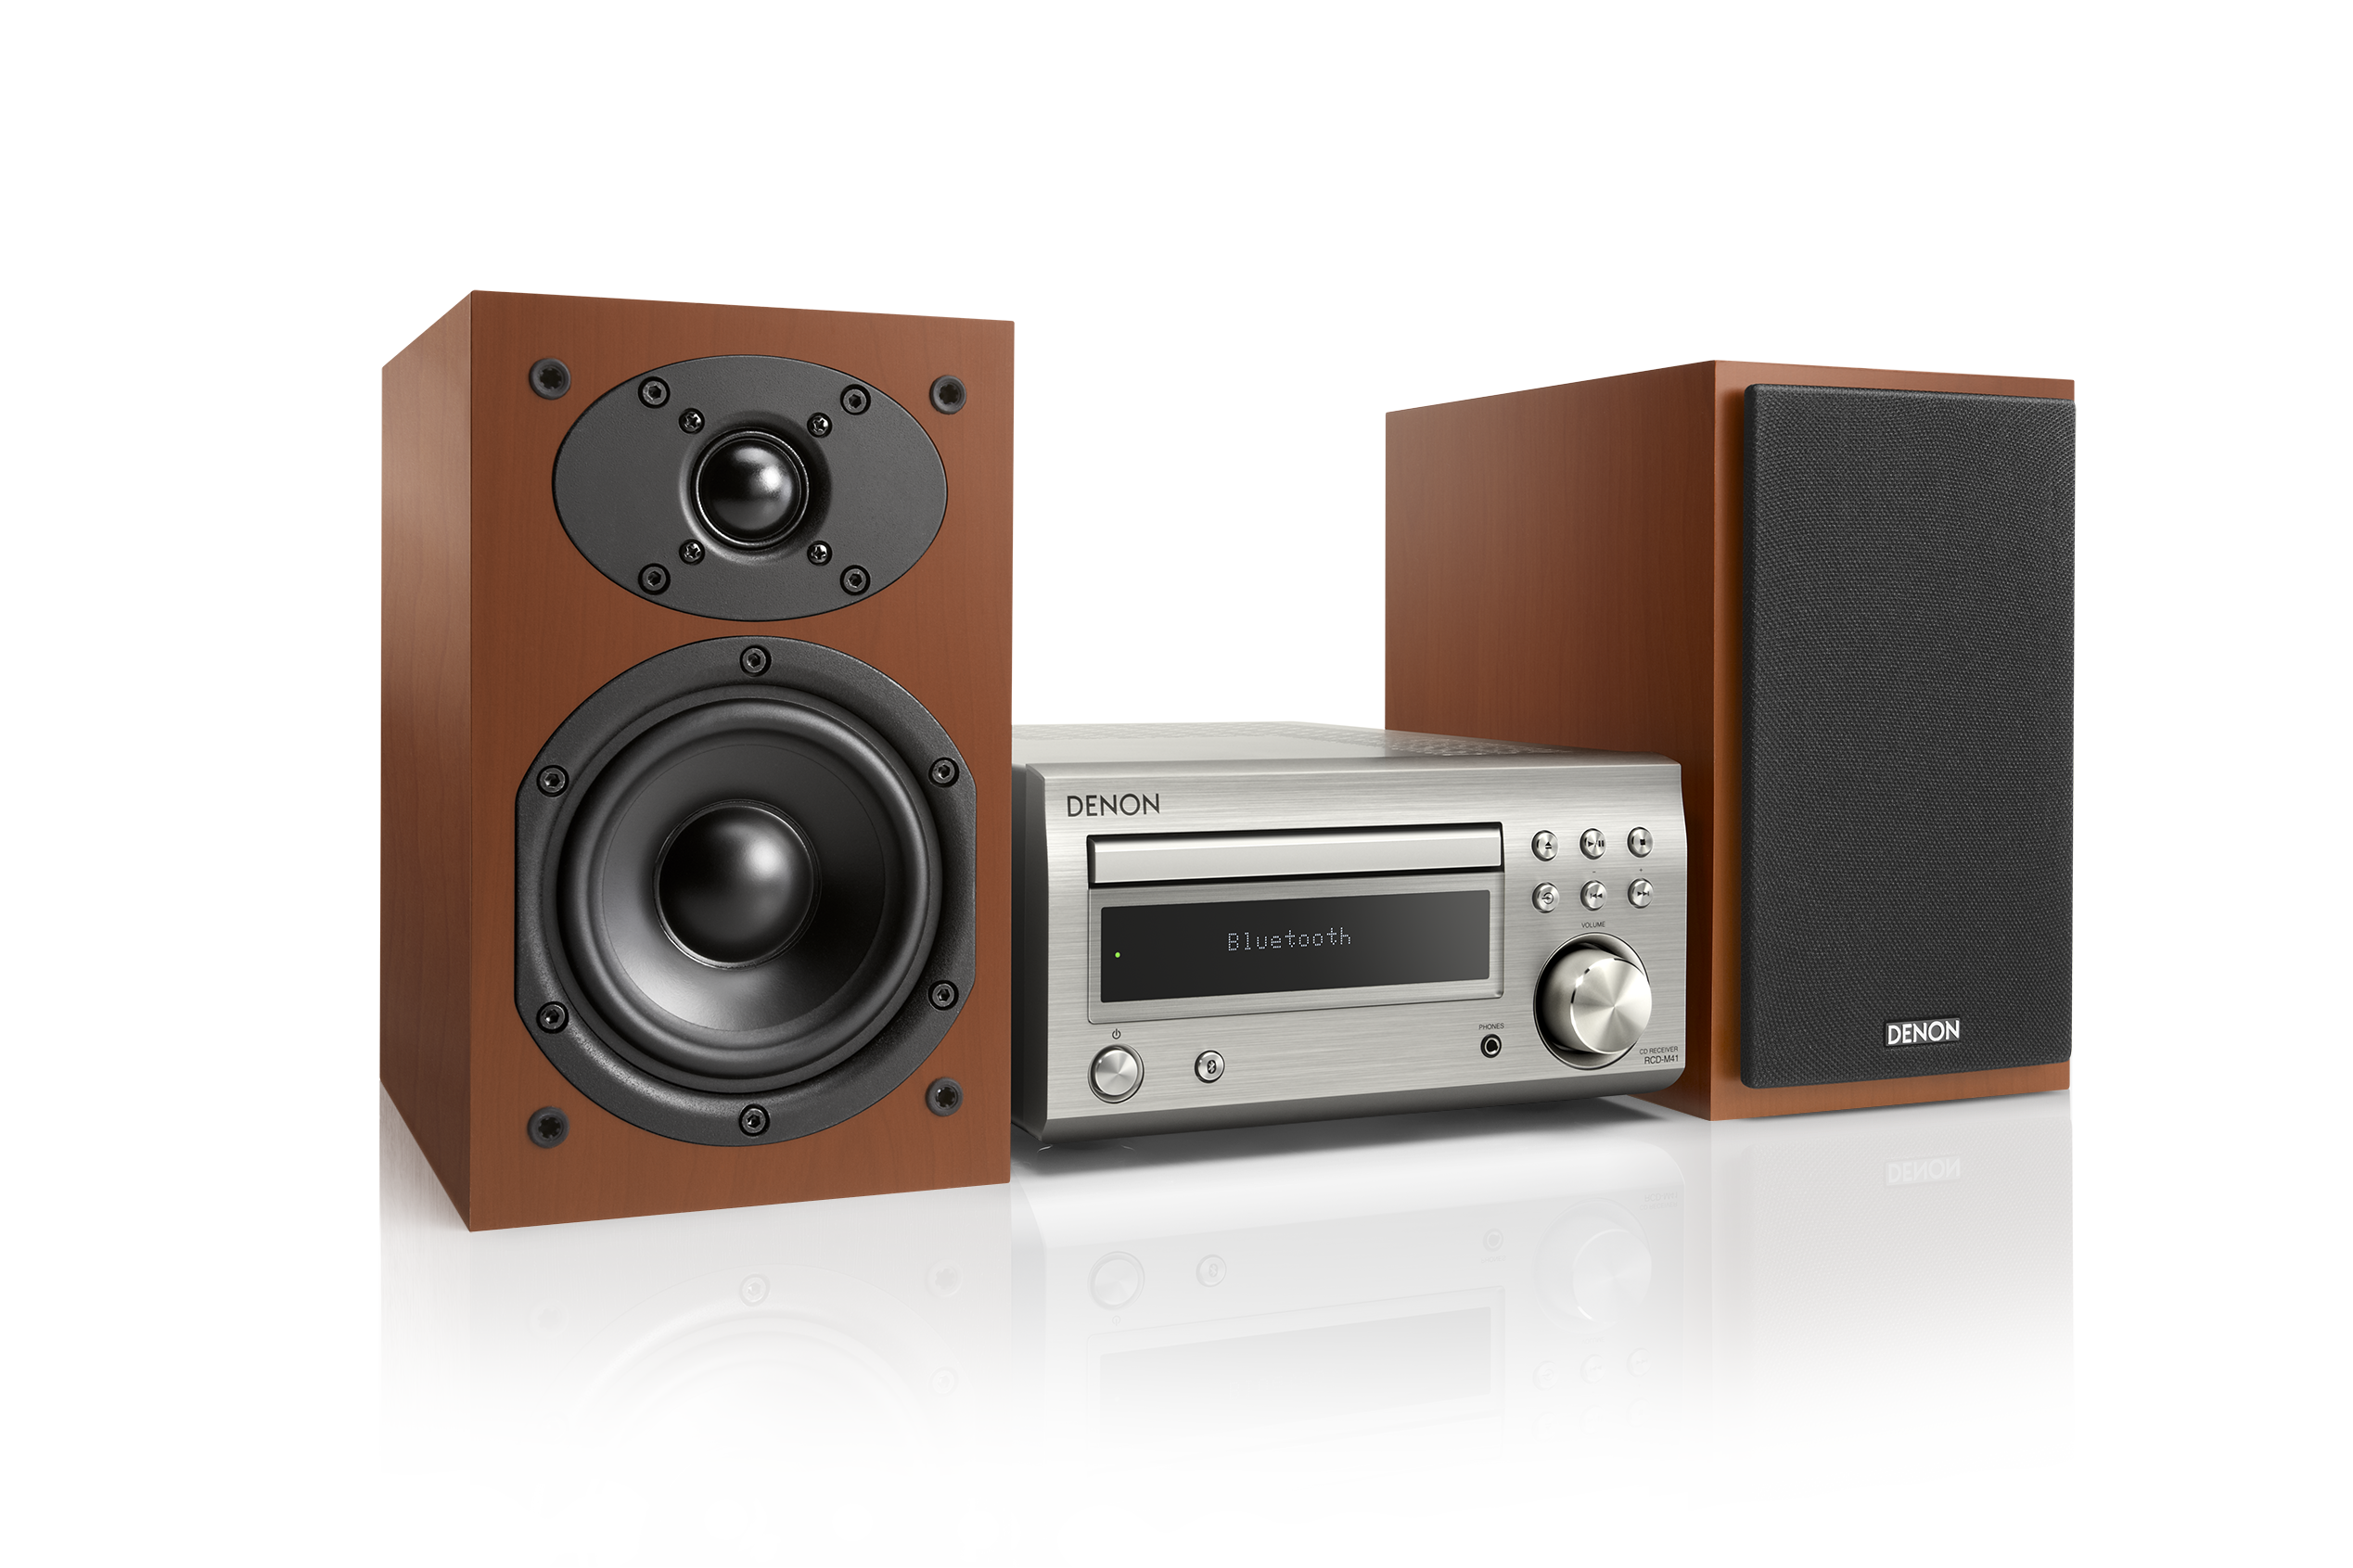 Perfect for Small Rooms and Home Cinema Compact HiFi Stereo System with CD Renewed Denon D-M41 Home Theater Mini Amplifier and Bookshelf Speaker Pair FM/AM Tuner and Wireless Bluetooth Music 